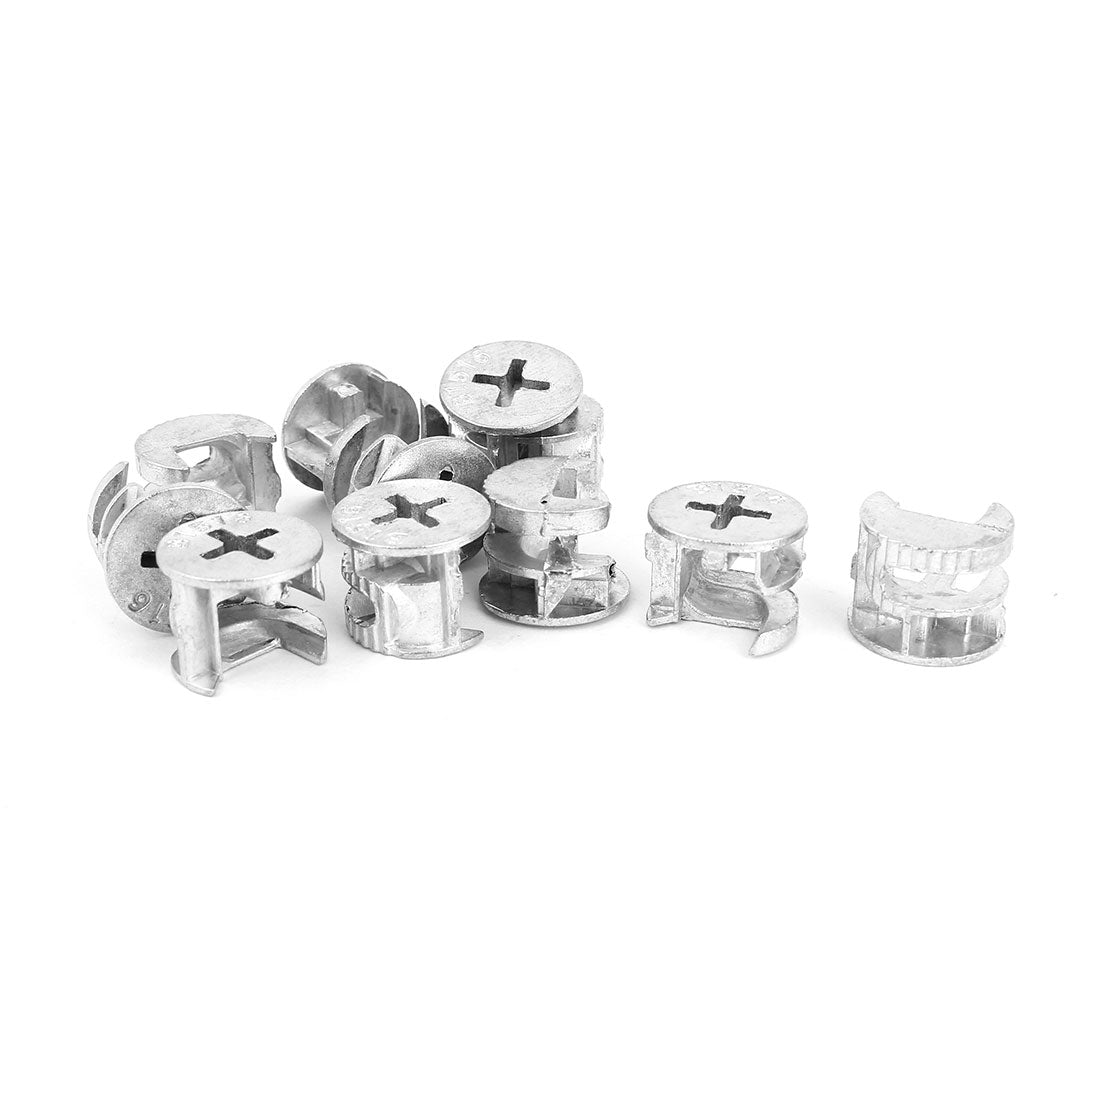 uxcell Uxcell Furniture Hardware Connecting Fittings Eccentric Cam Wheel 15mm Dia 11 Pcs